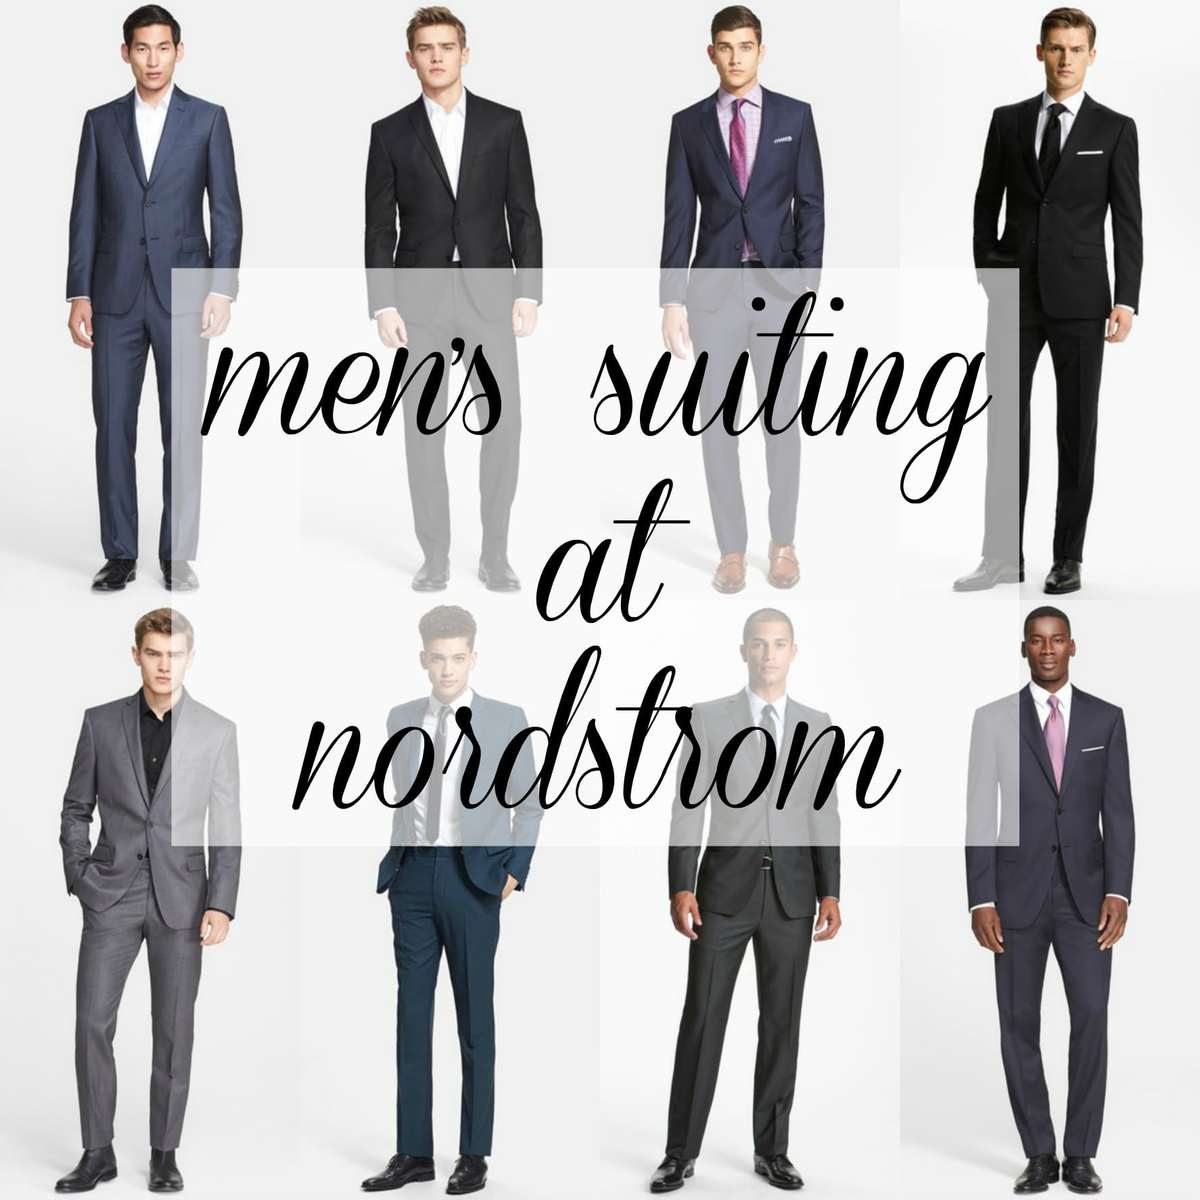 Men’s Suiting at Nordstrom